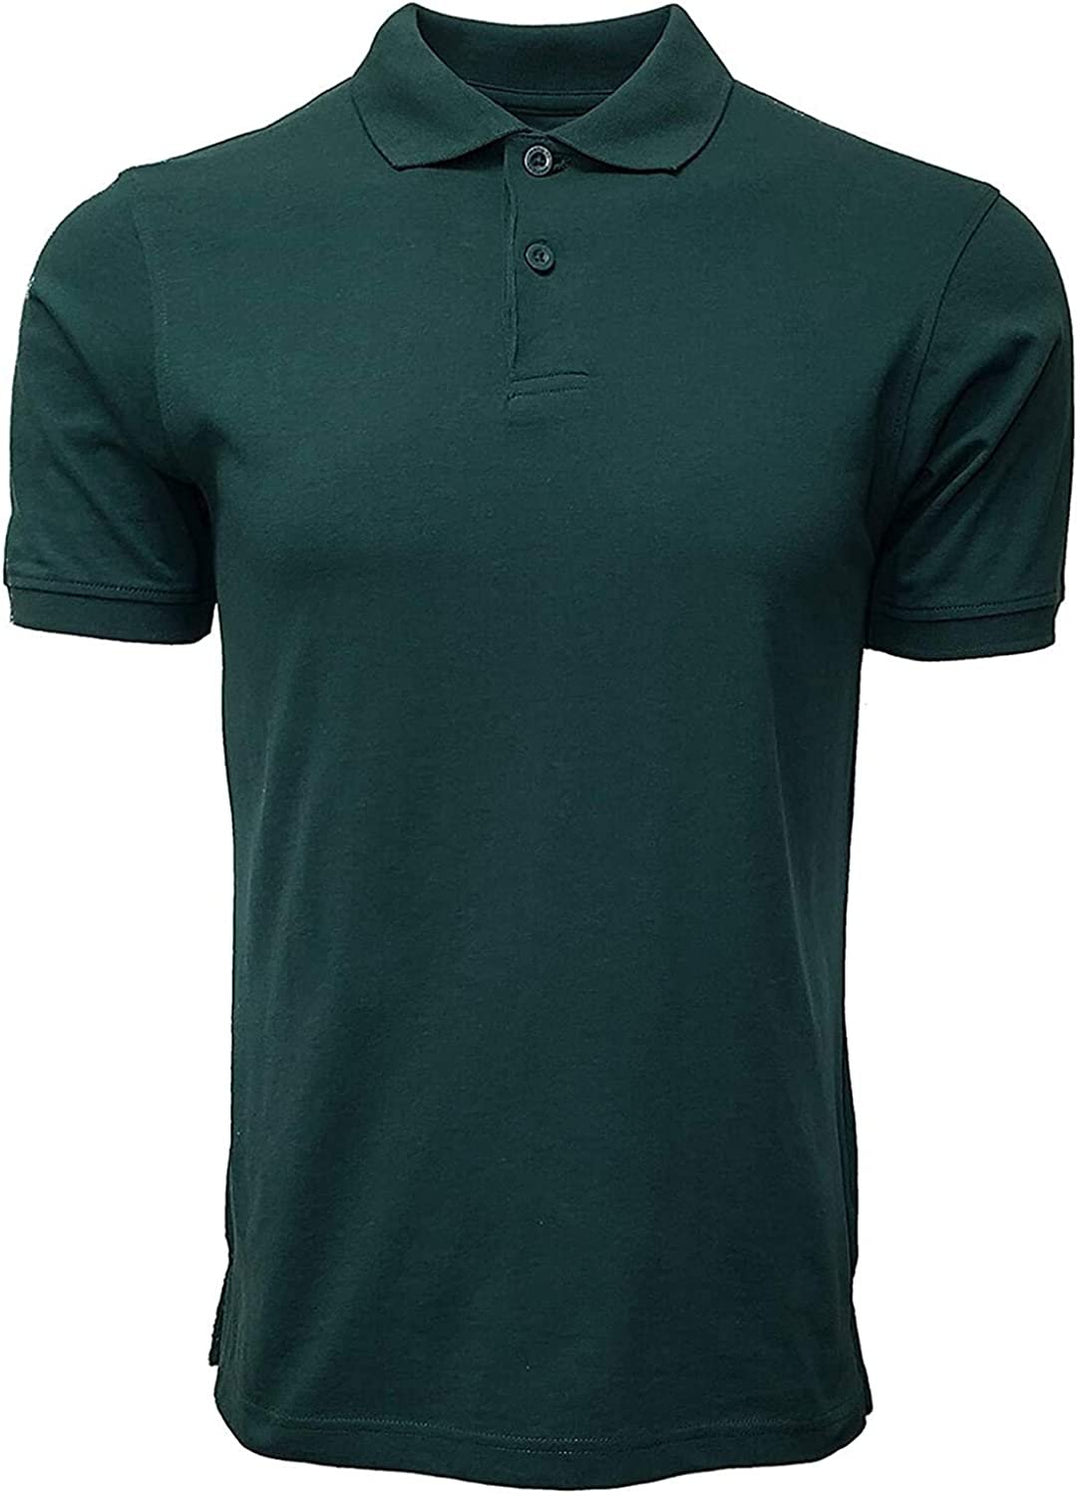 Marquis Men's Solid Jersey Polo